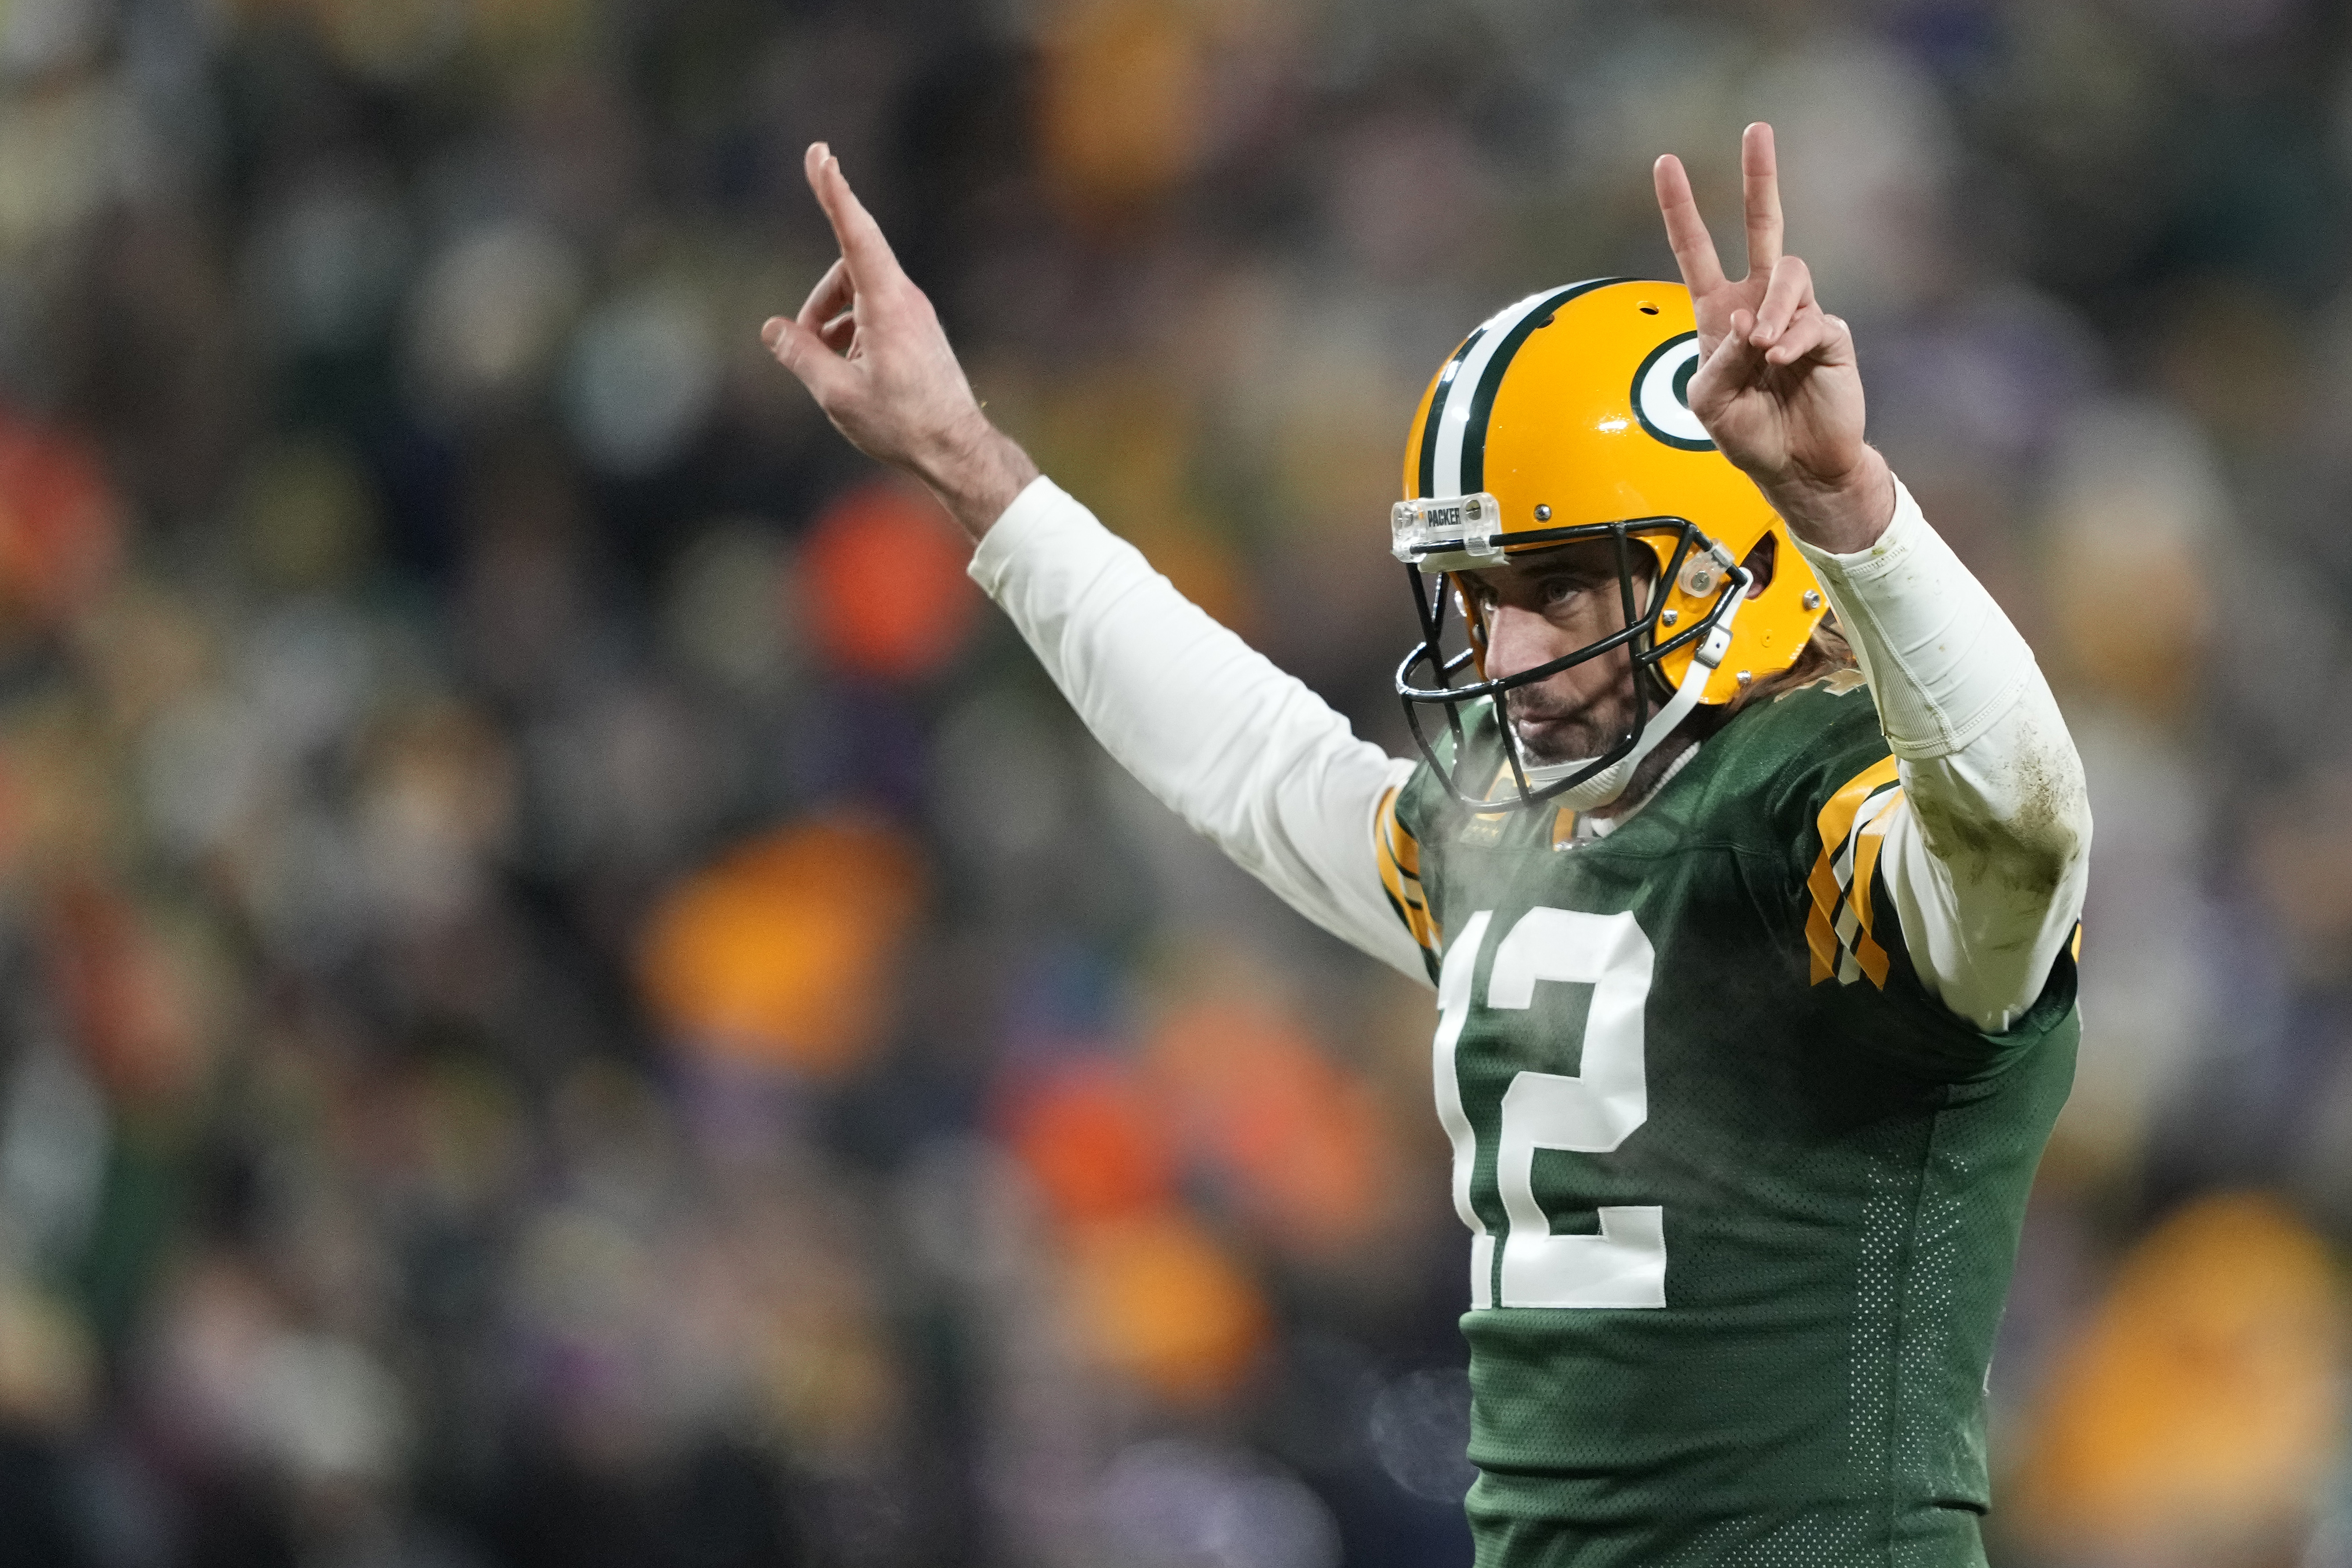 Quarterback Aaron Rodgers #12 of the Green Bay Packers celebrates after a touchdown during the 3rd quarter of the game against the Minnesota Vikings at Lambeau Field on January 02, 2022 in Green Bay, Wisconsin.